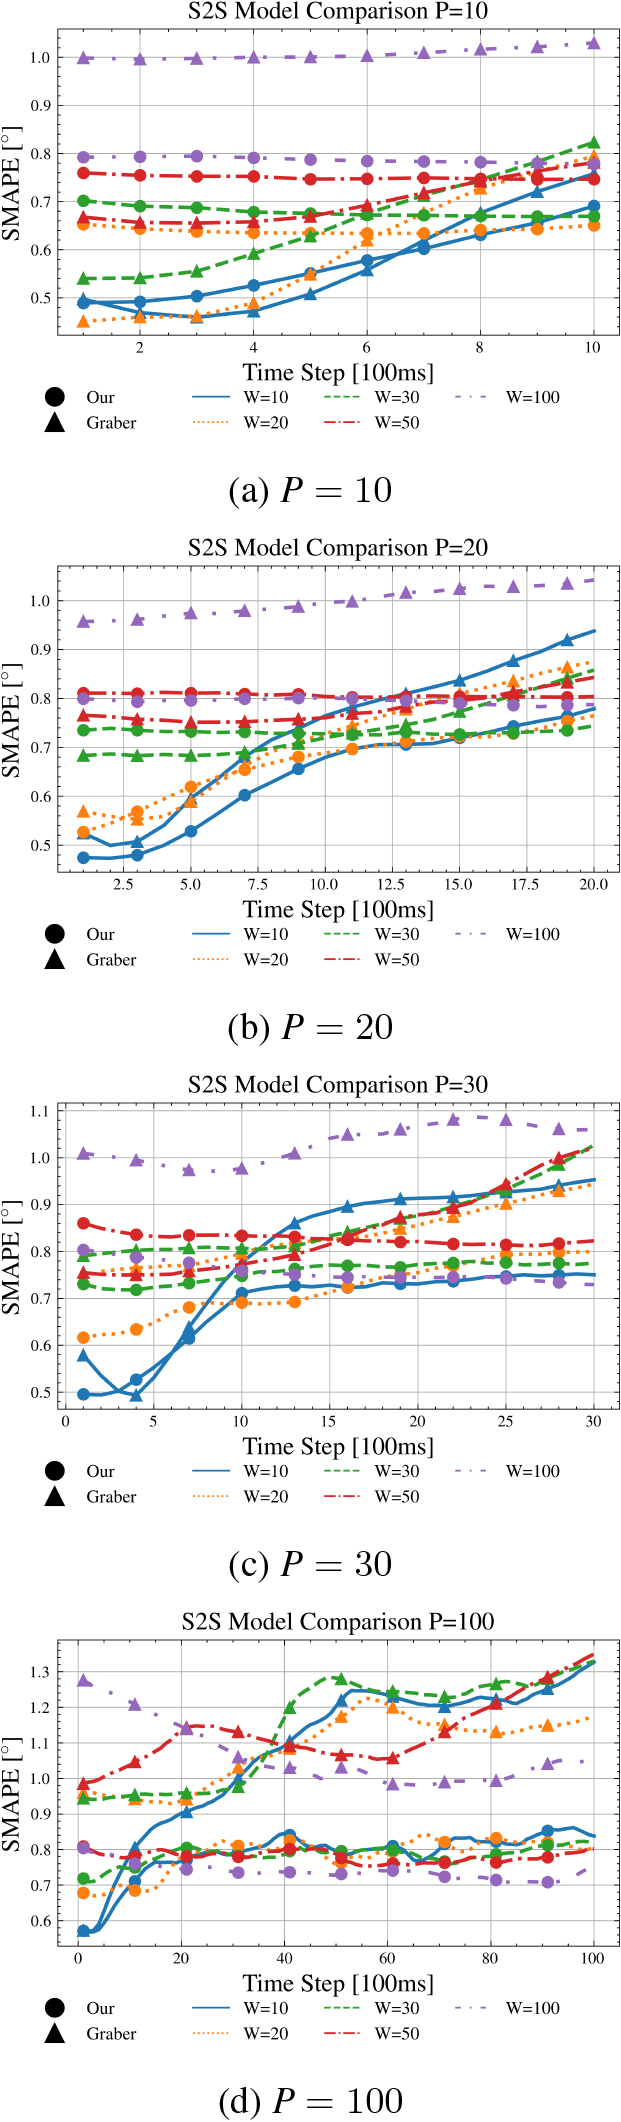 S2S averaged sMAPE comparison for Approach A for different horizons P.